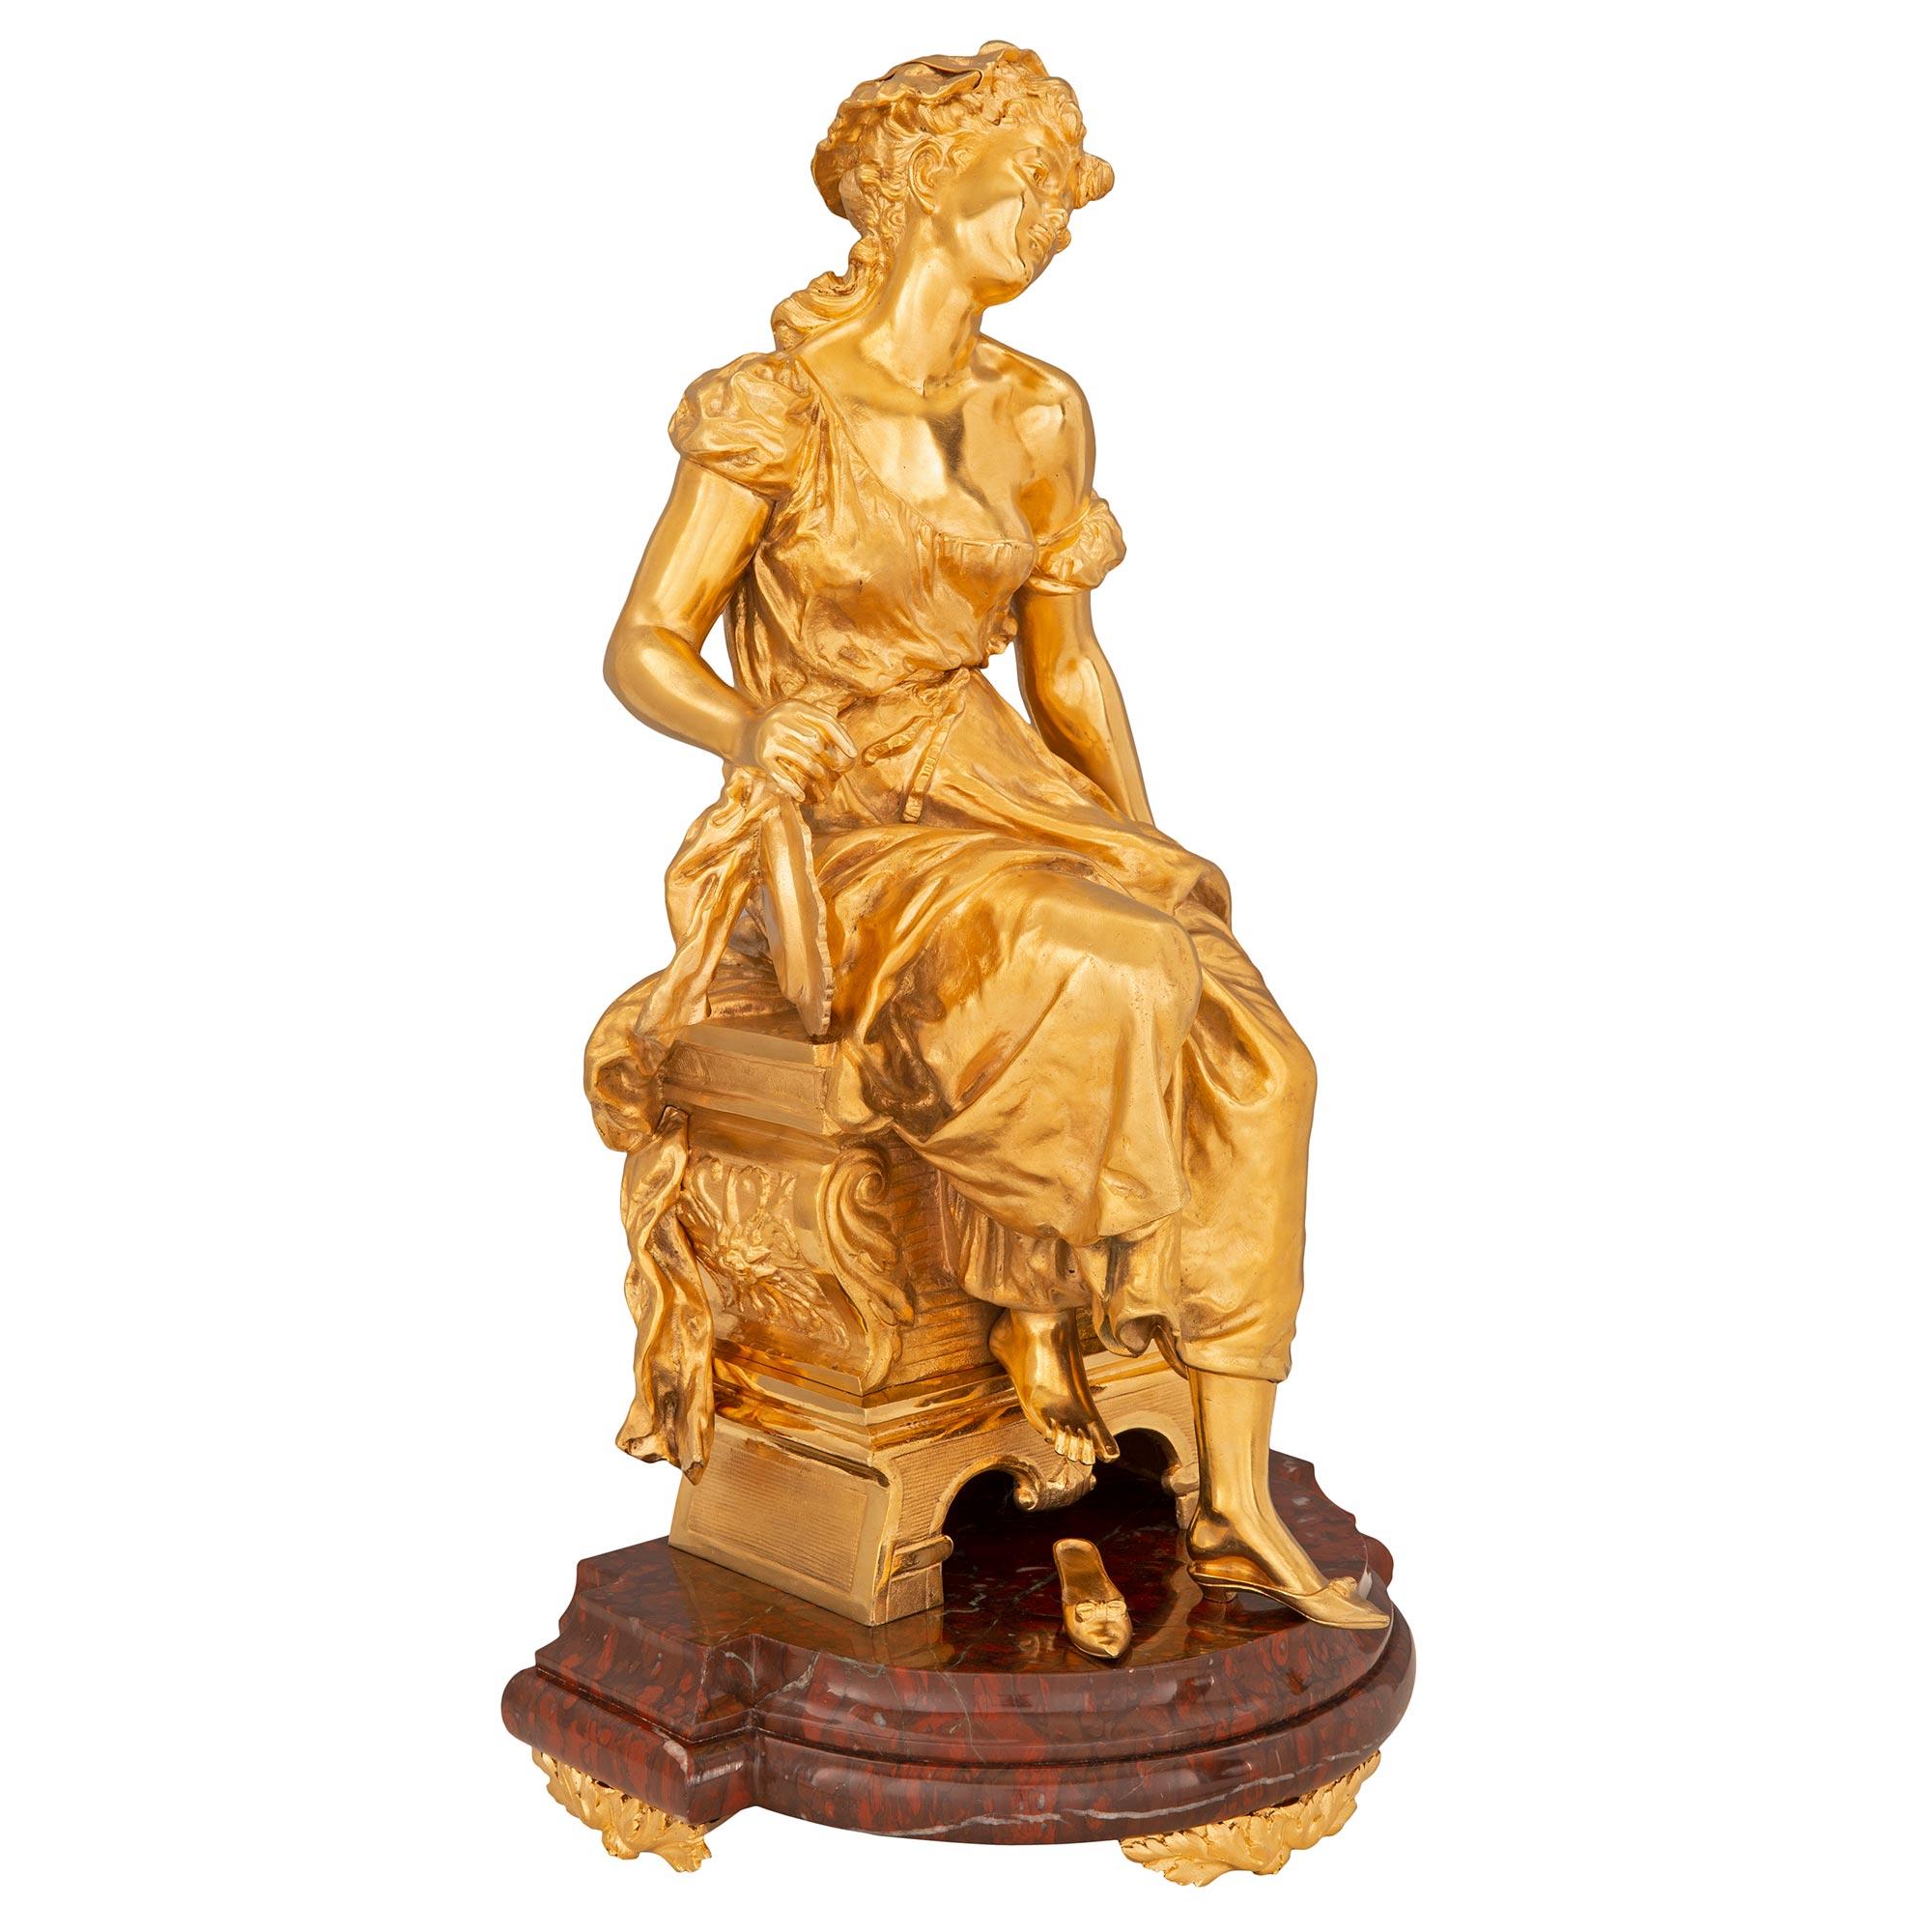 A stunning and extremely high quality French 19th century Louis XVI st. Belle Époque period ormolu and Rouge Griotte marble statue. The statue is raised by exceptional acanthus leaf ormolu feet below the most elegant thick Rouge Griotte marble base